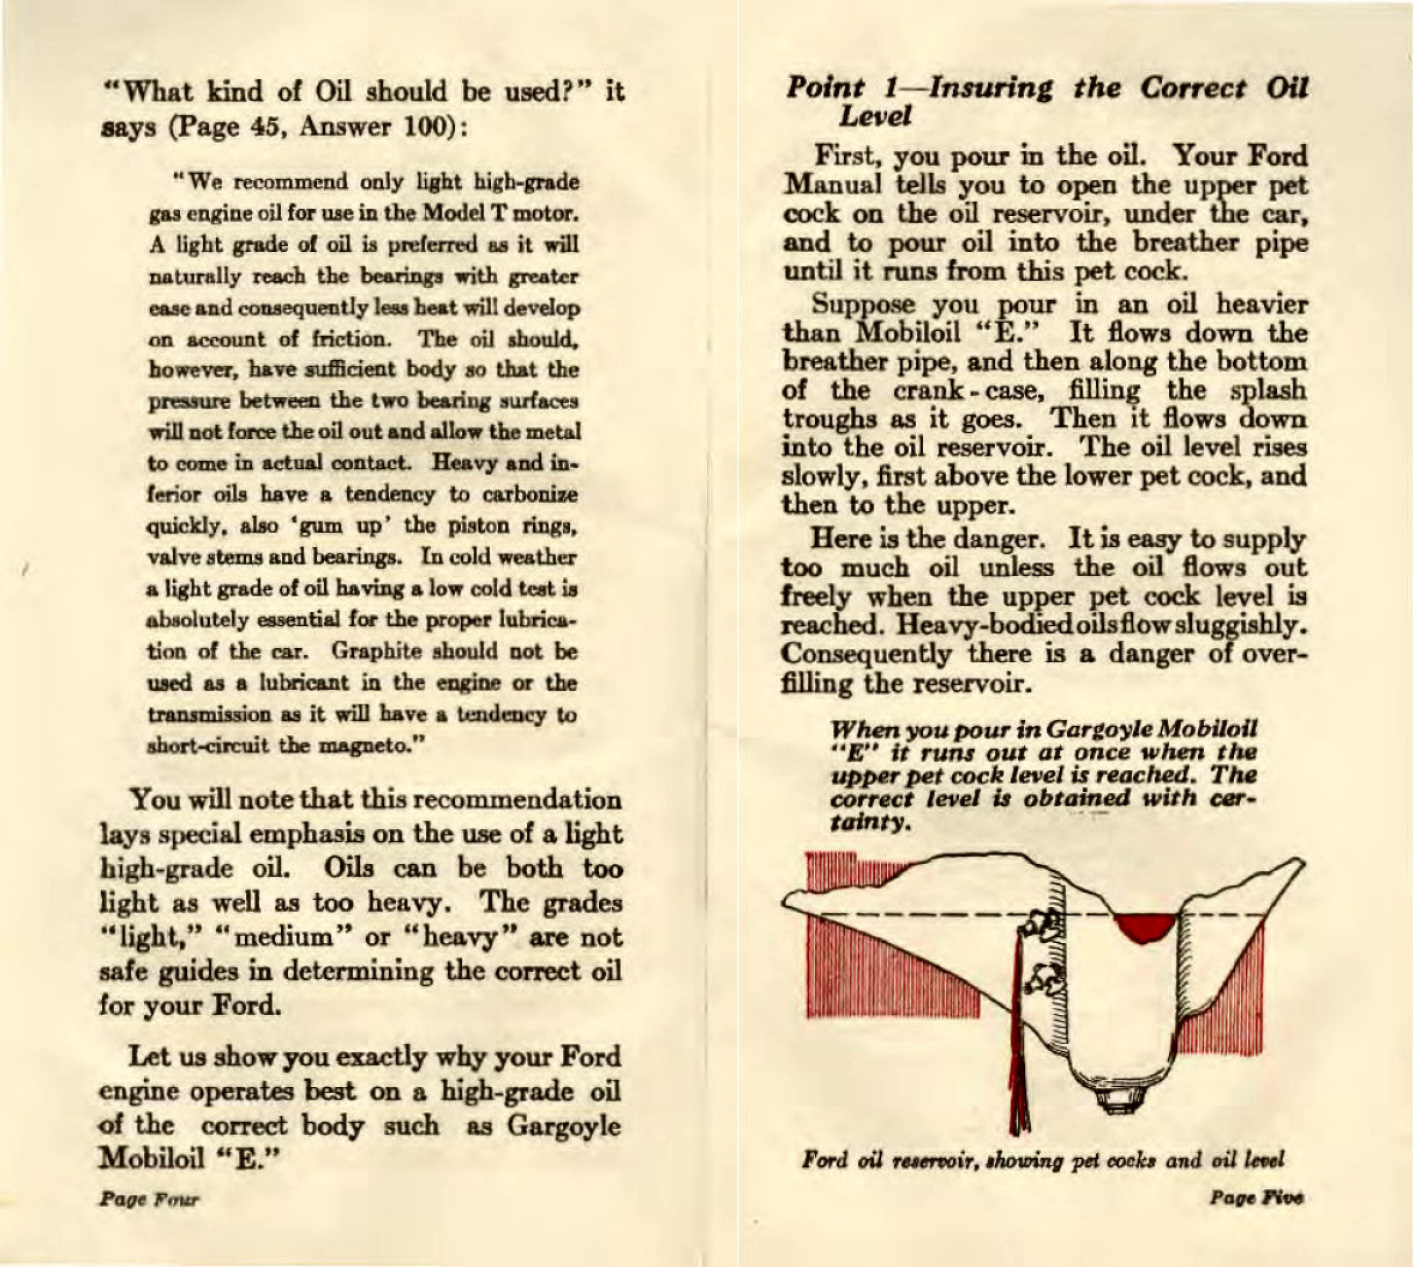 1923_Ford_Lube_Booklet-04-05